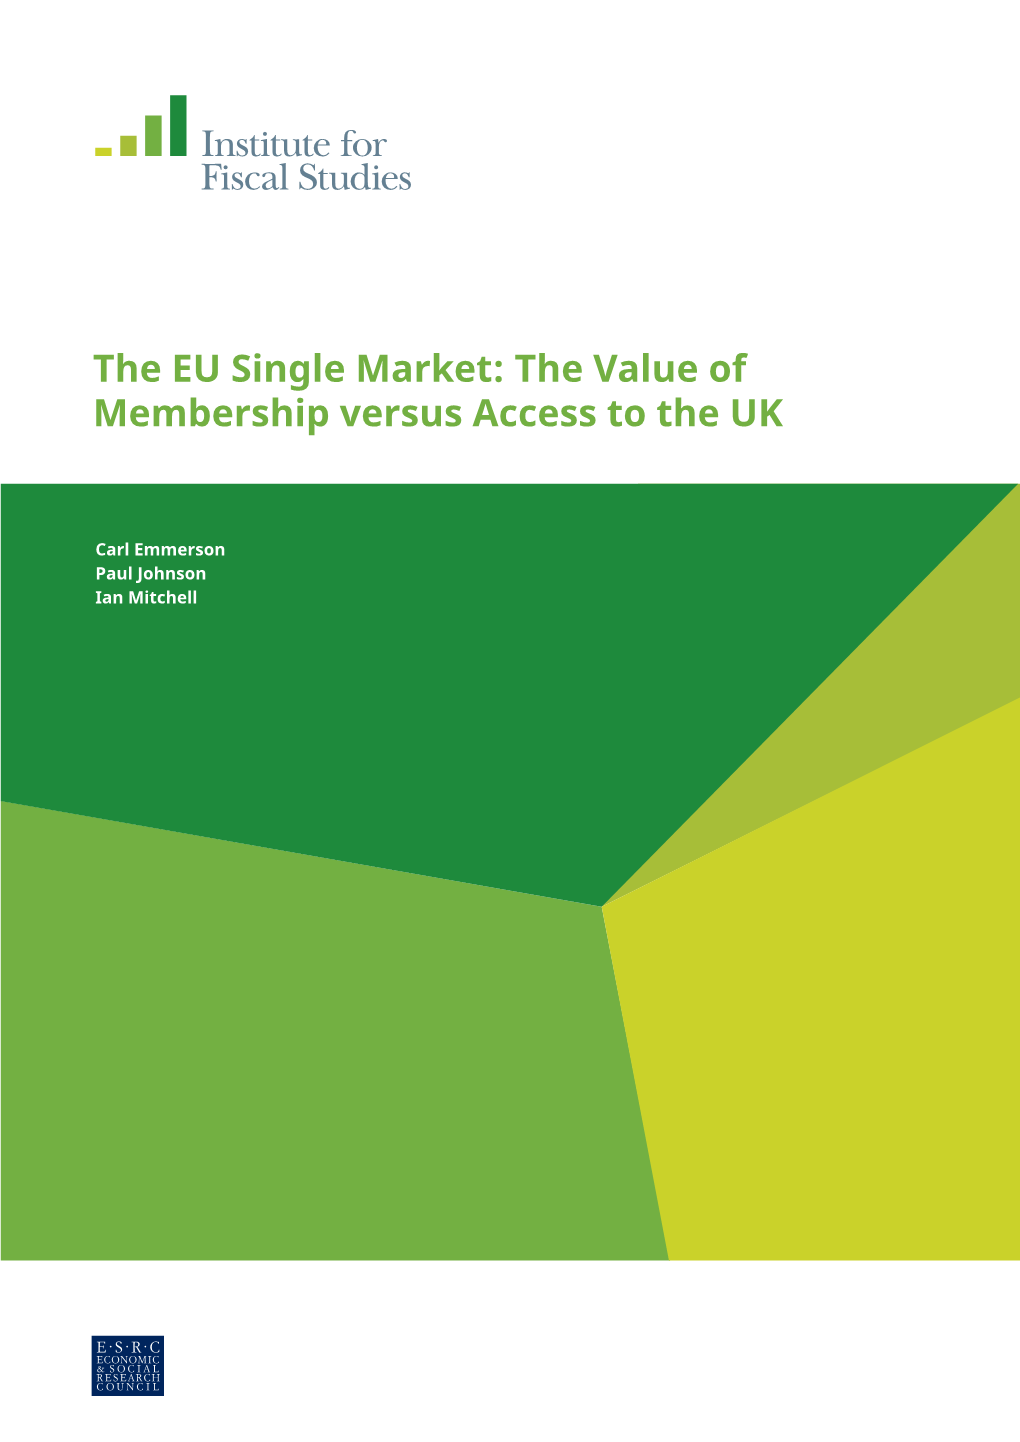 The EU Single Market: the Value of Membership Versus Access to the UK